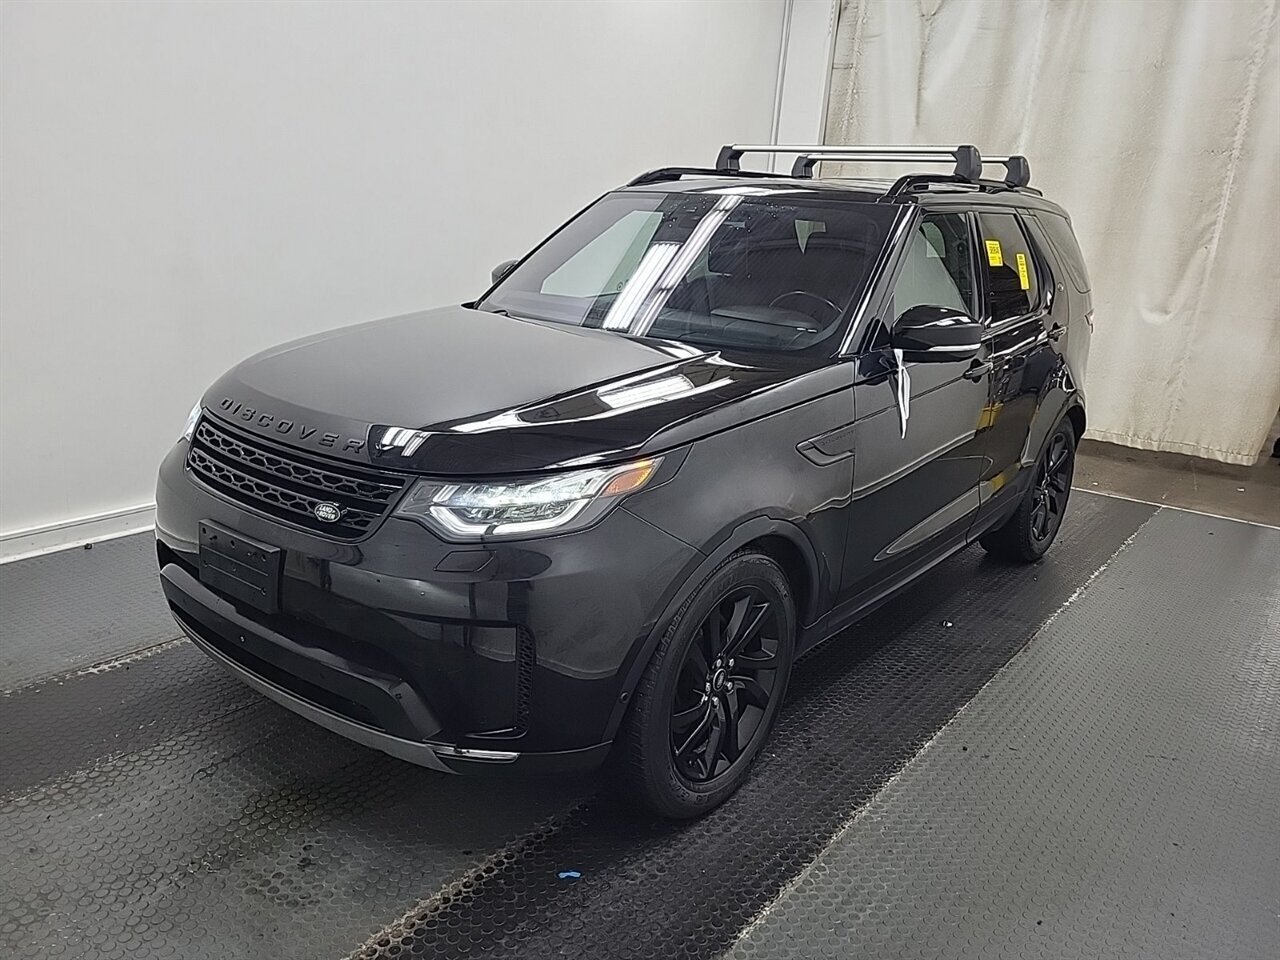 2019 Land Rover Discovery HSE Luxury TD6, 4WD, 7-PASSENGER, MERIDIAN